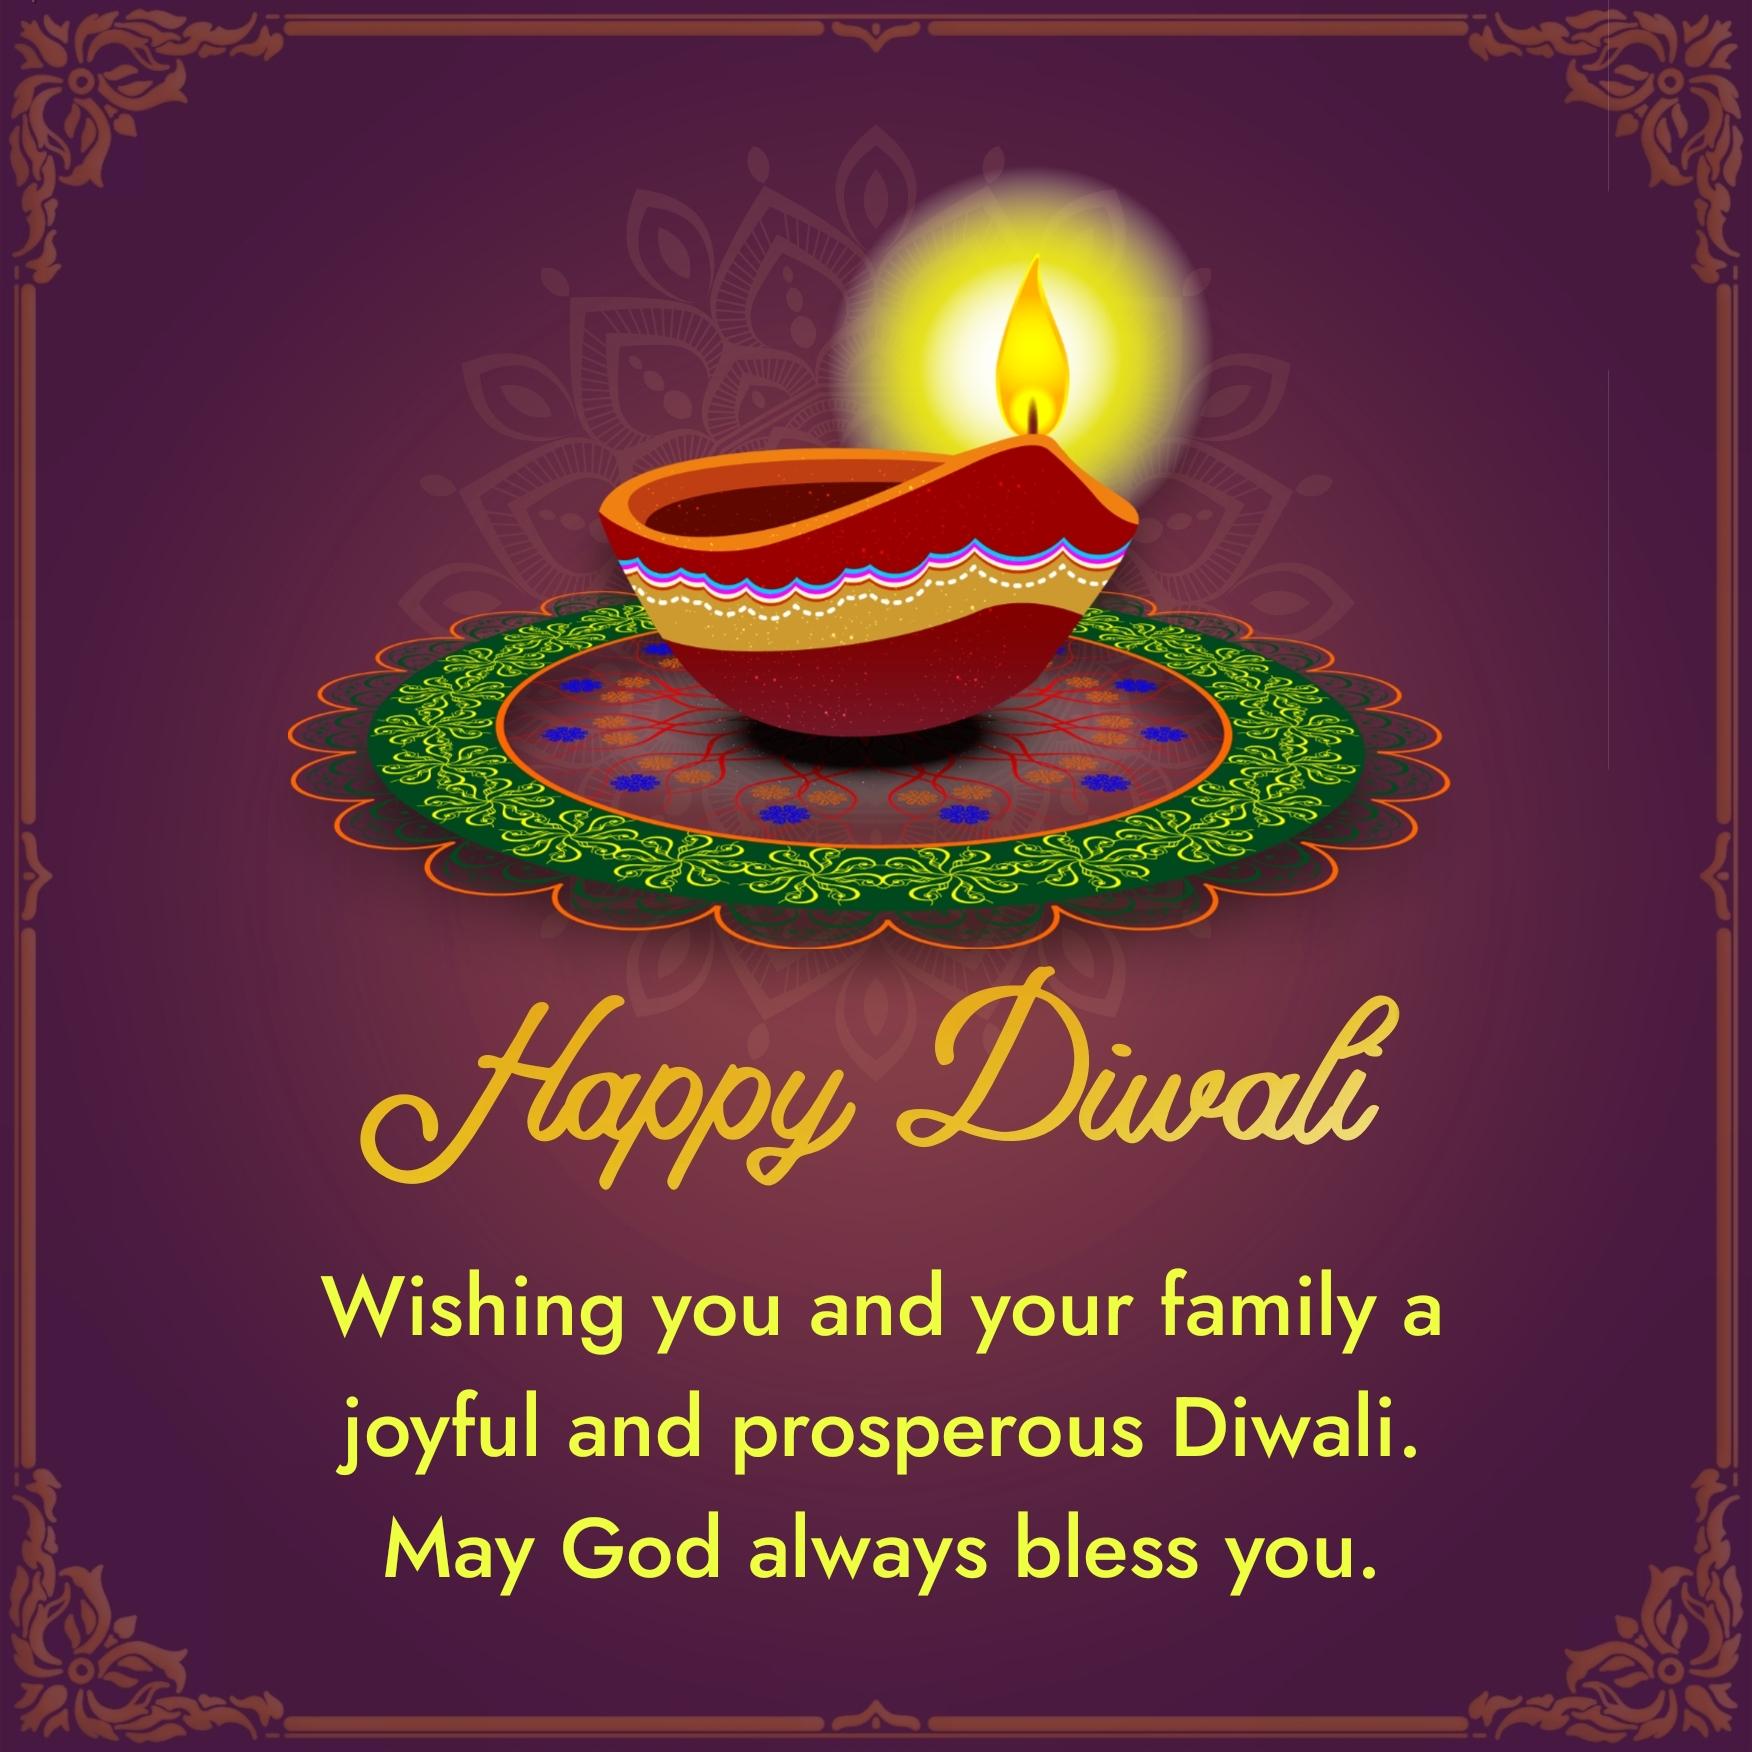 Wishing you and your family a joyful and prosperous Diwali